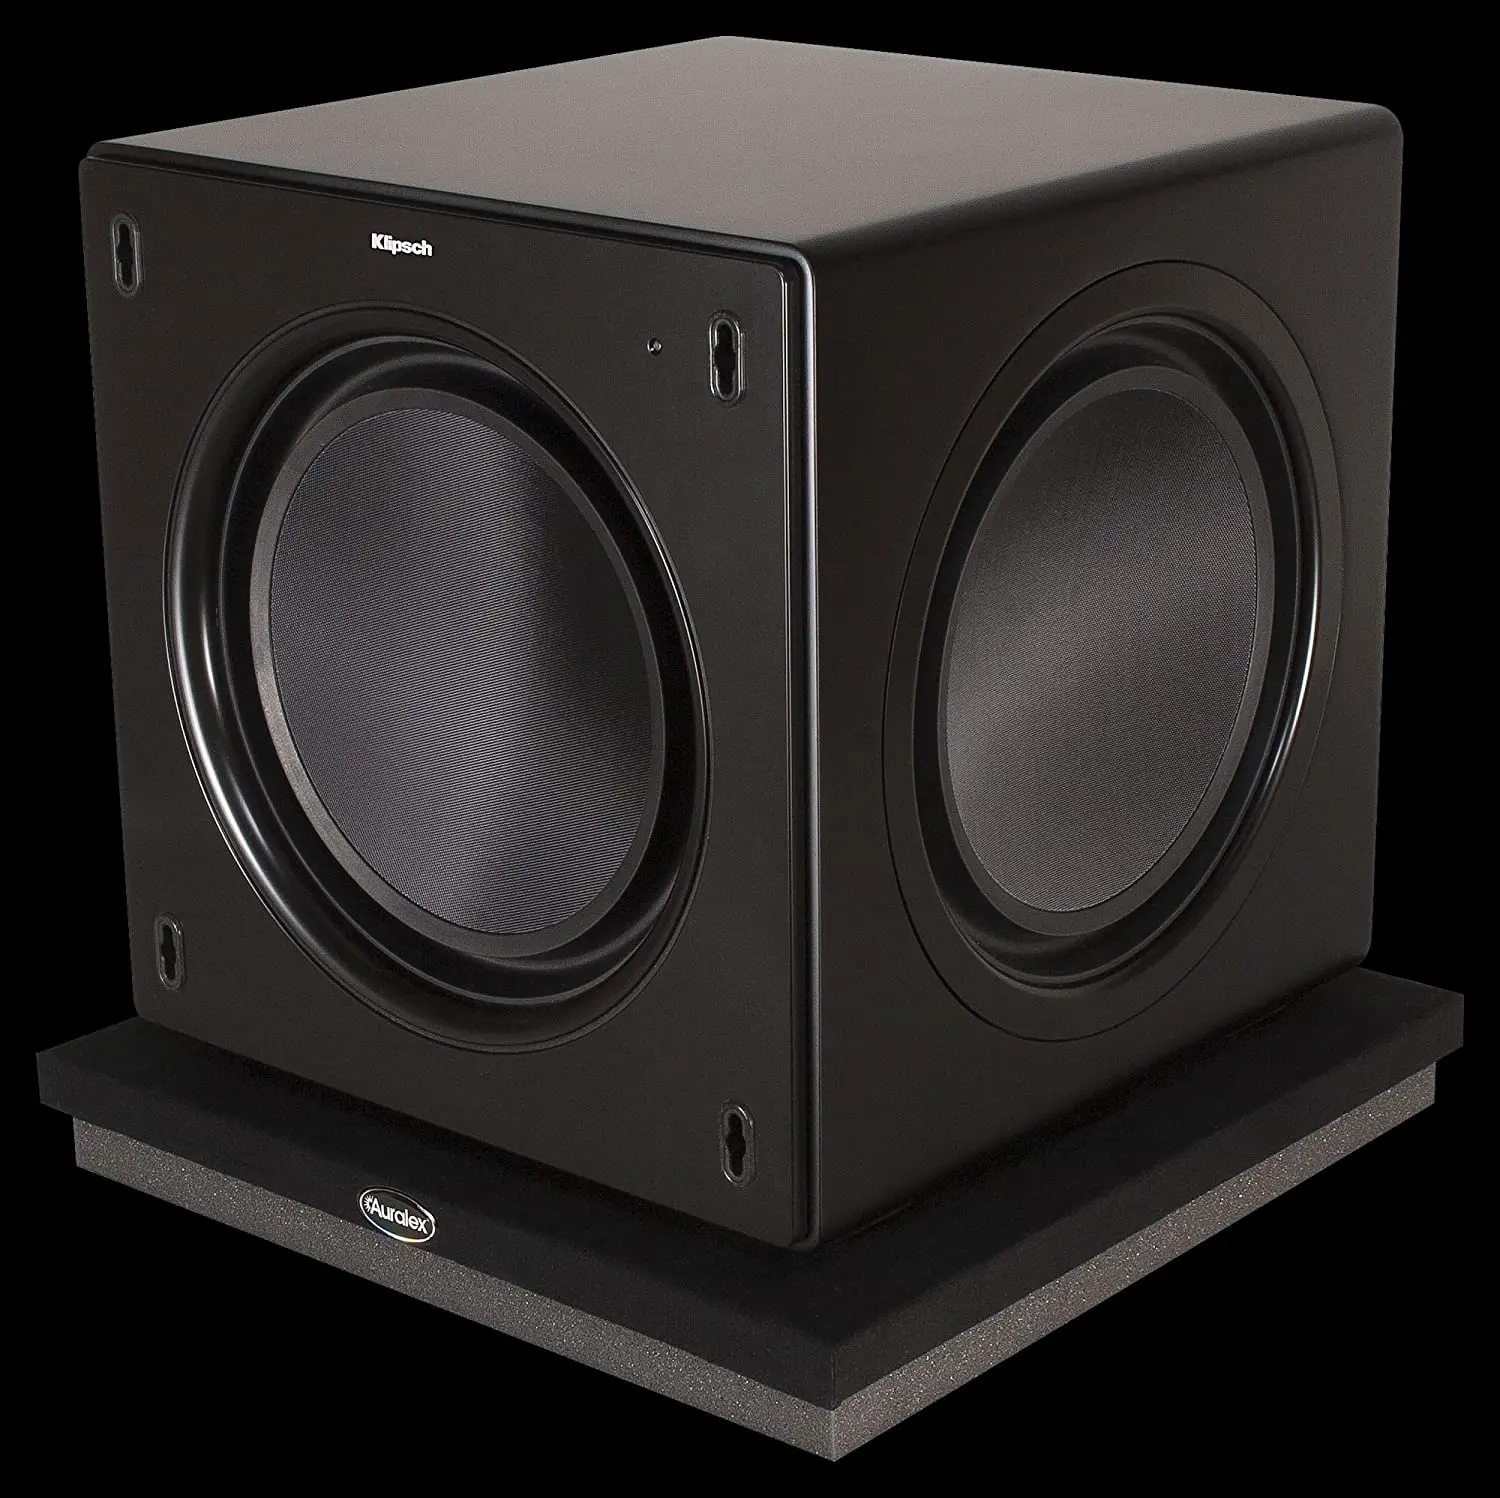 How to Isolate Subwoofer From Floor: Sub Isolation Platforms